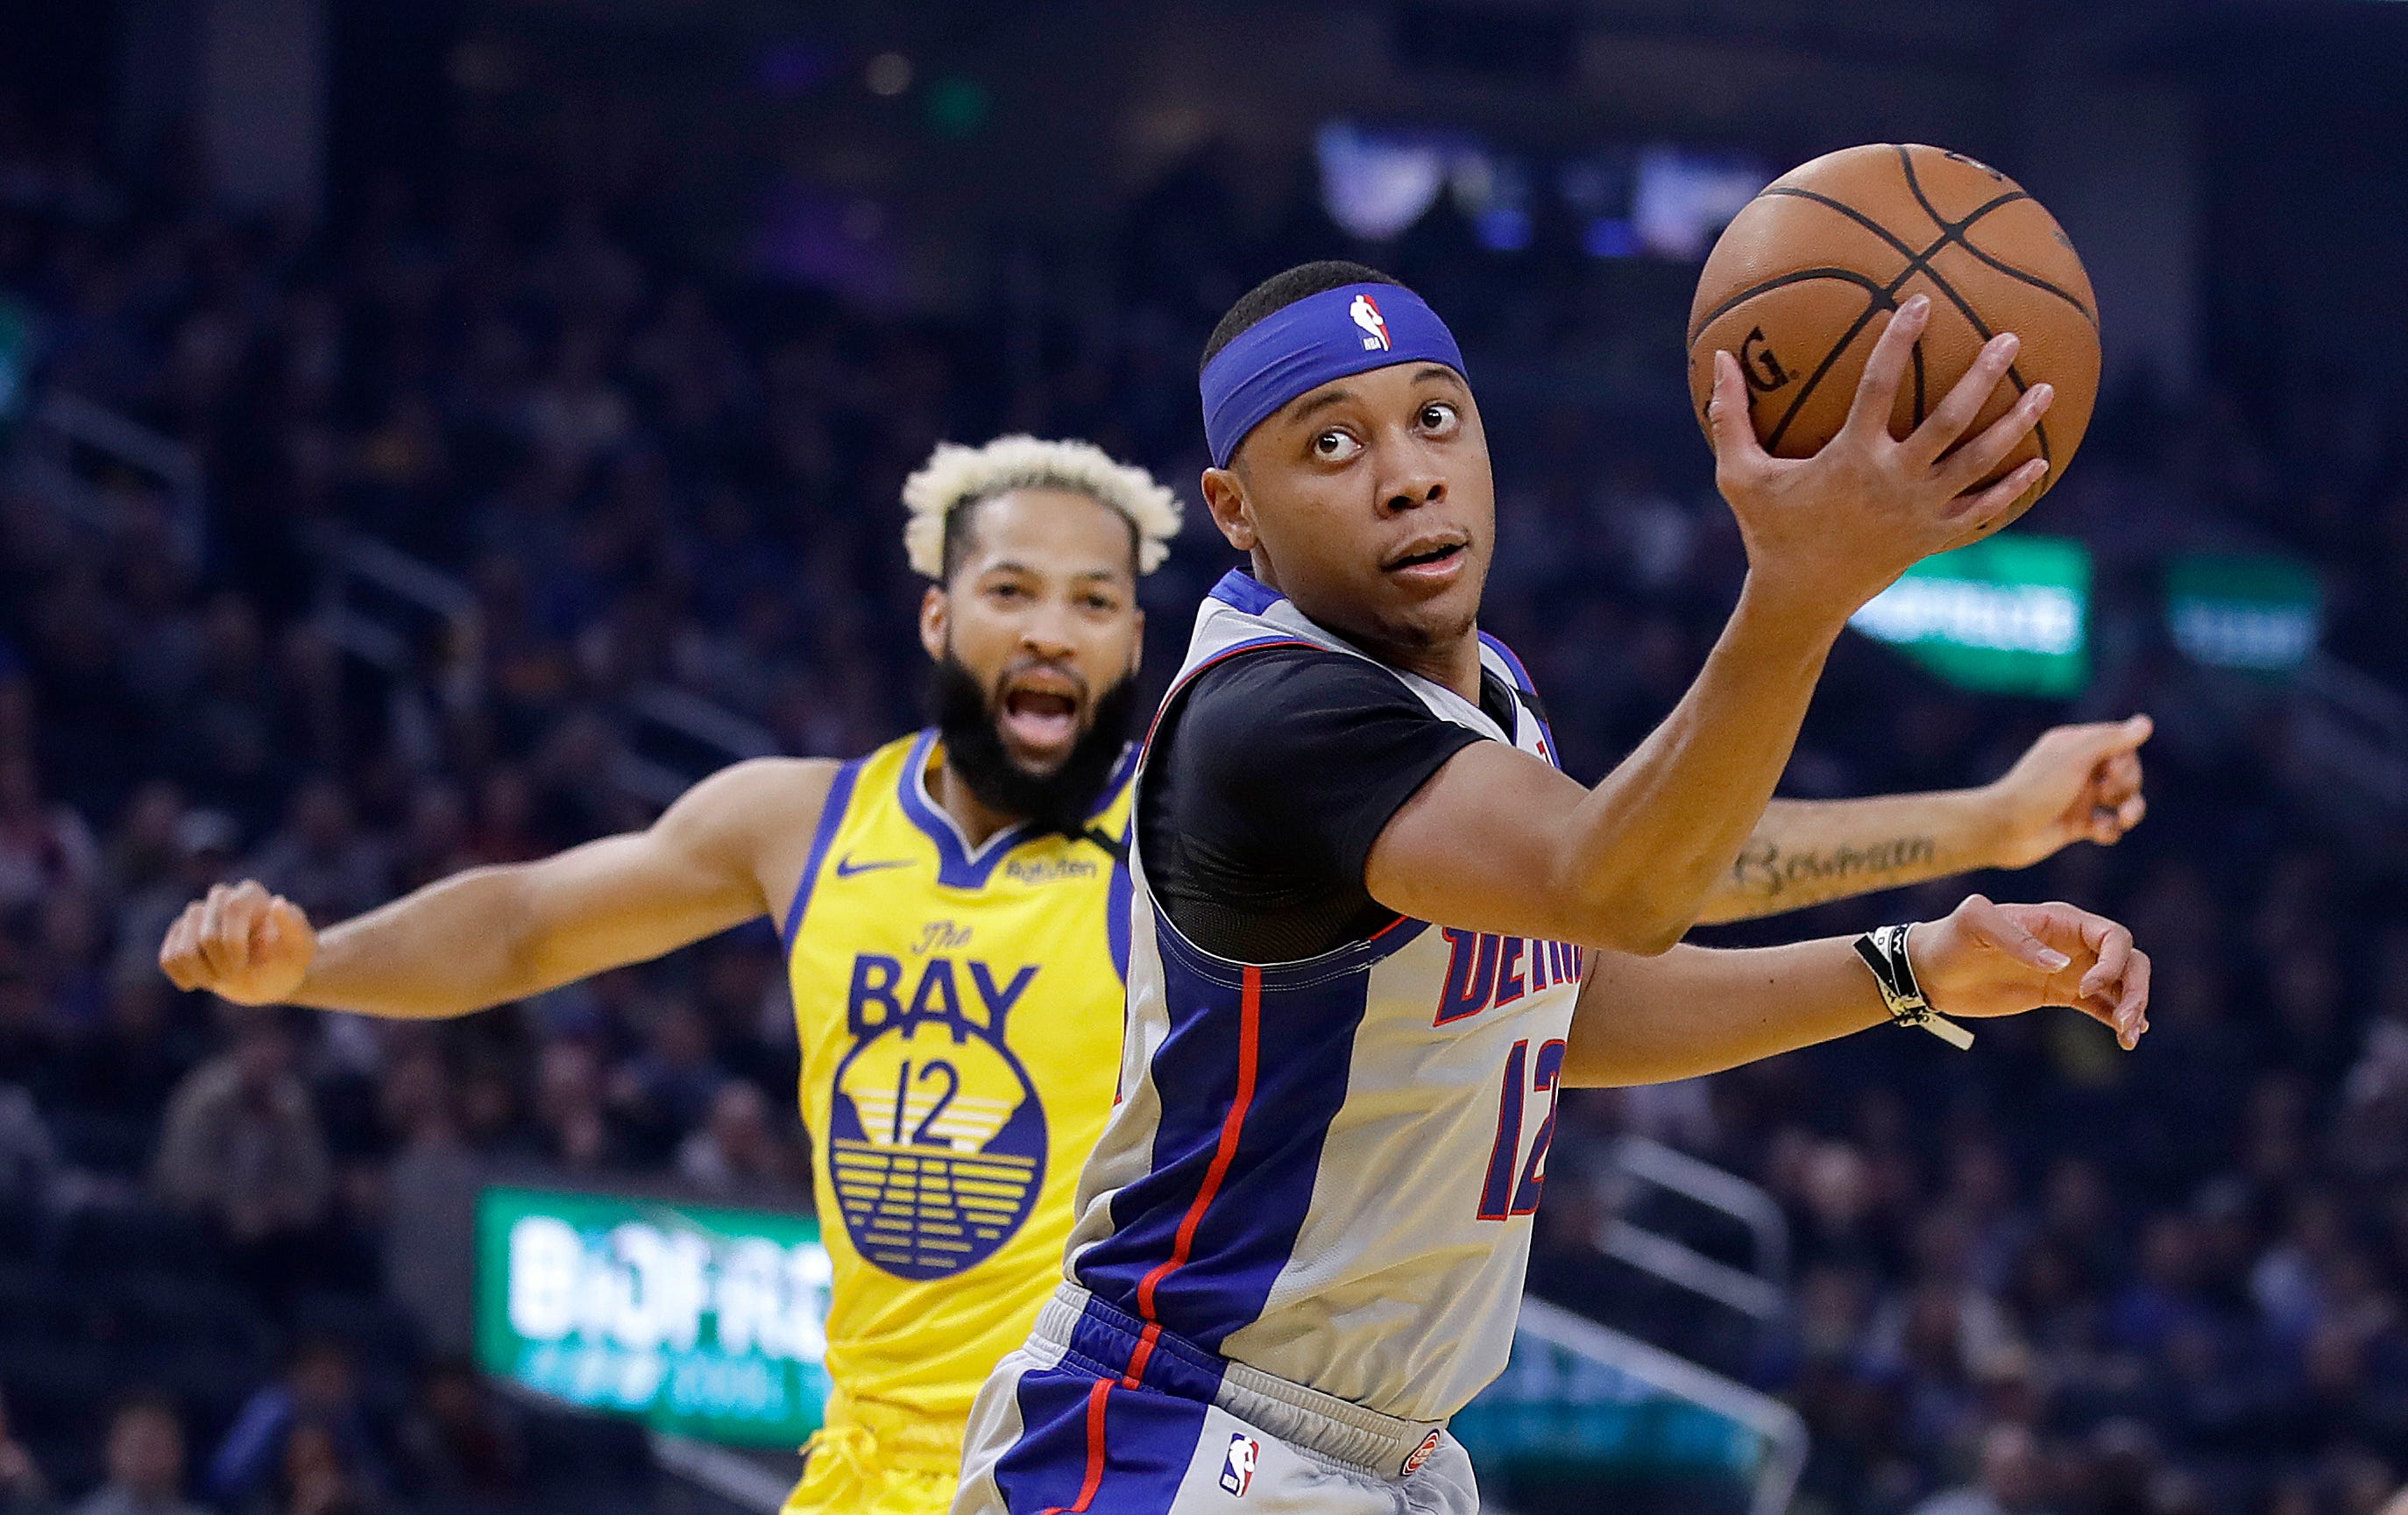 Detroit Pistons' Tim Frazier, right, looks to shoot past Golden State Warriors' Ky Bowman during the first half of an NBA basketball game Saturday, Jan. 4, 2020, in San Francisco.